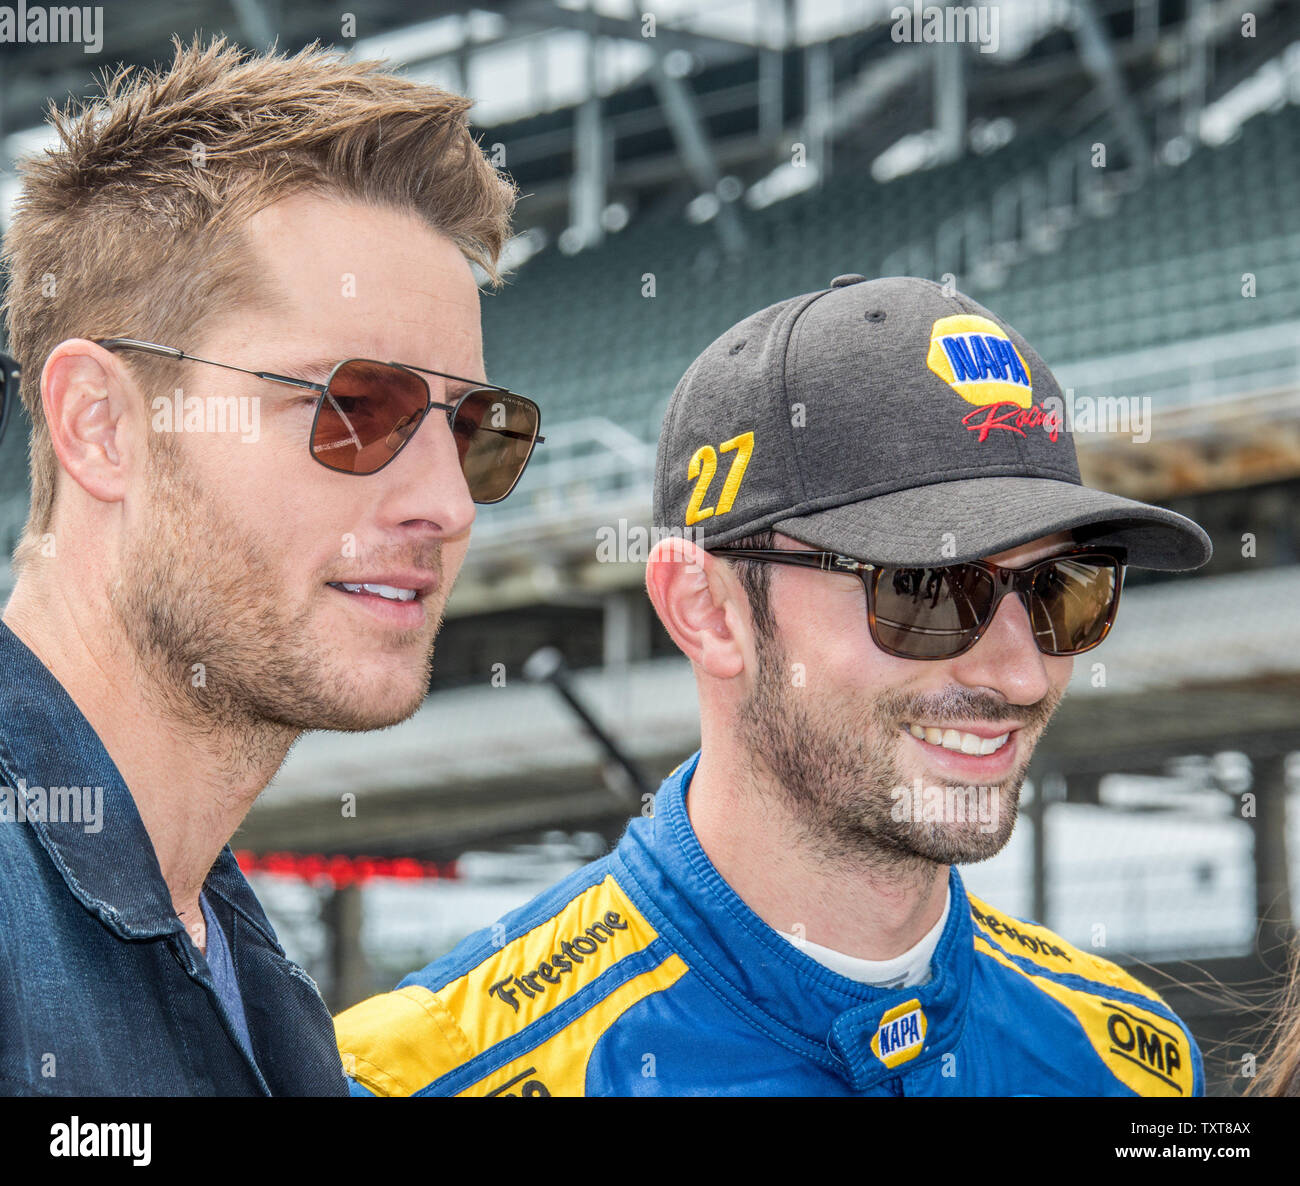 Actor Justin Hartley (left) and Alexander Rossi converse on pit row prior  to the 2019 Indycar Grand Prix, on May 11, 2019 in Indianapolis, Indiana.  Photo by Edwin Locke/UPI Stock Photo - Alamy